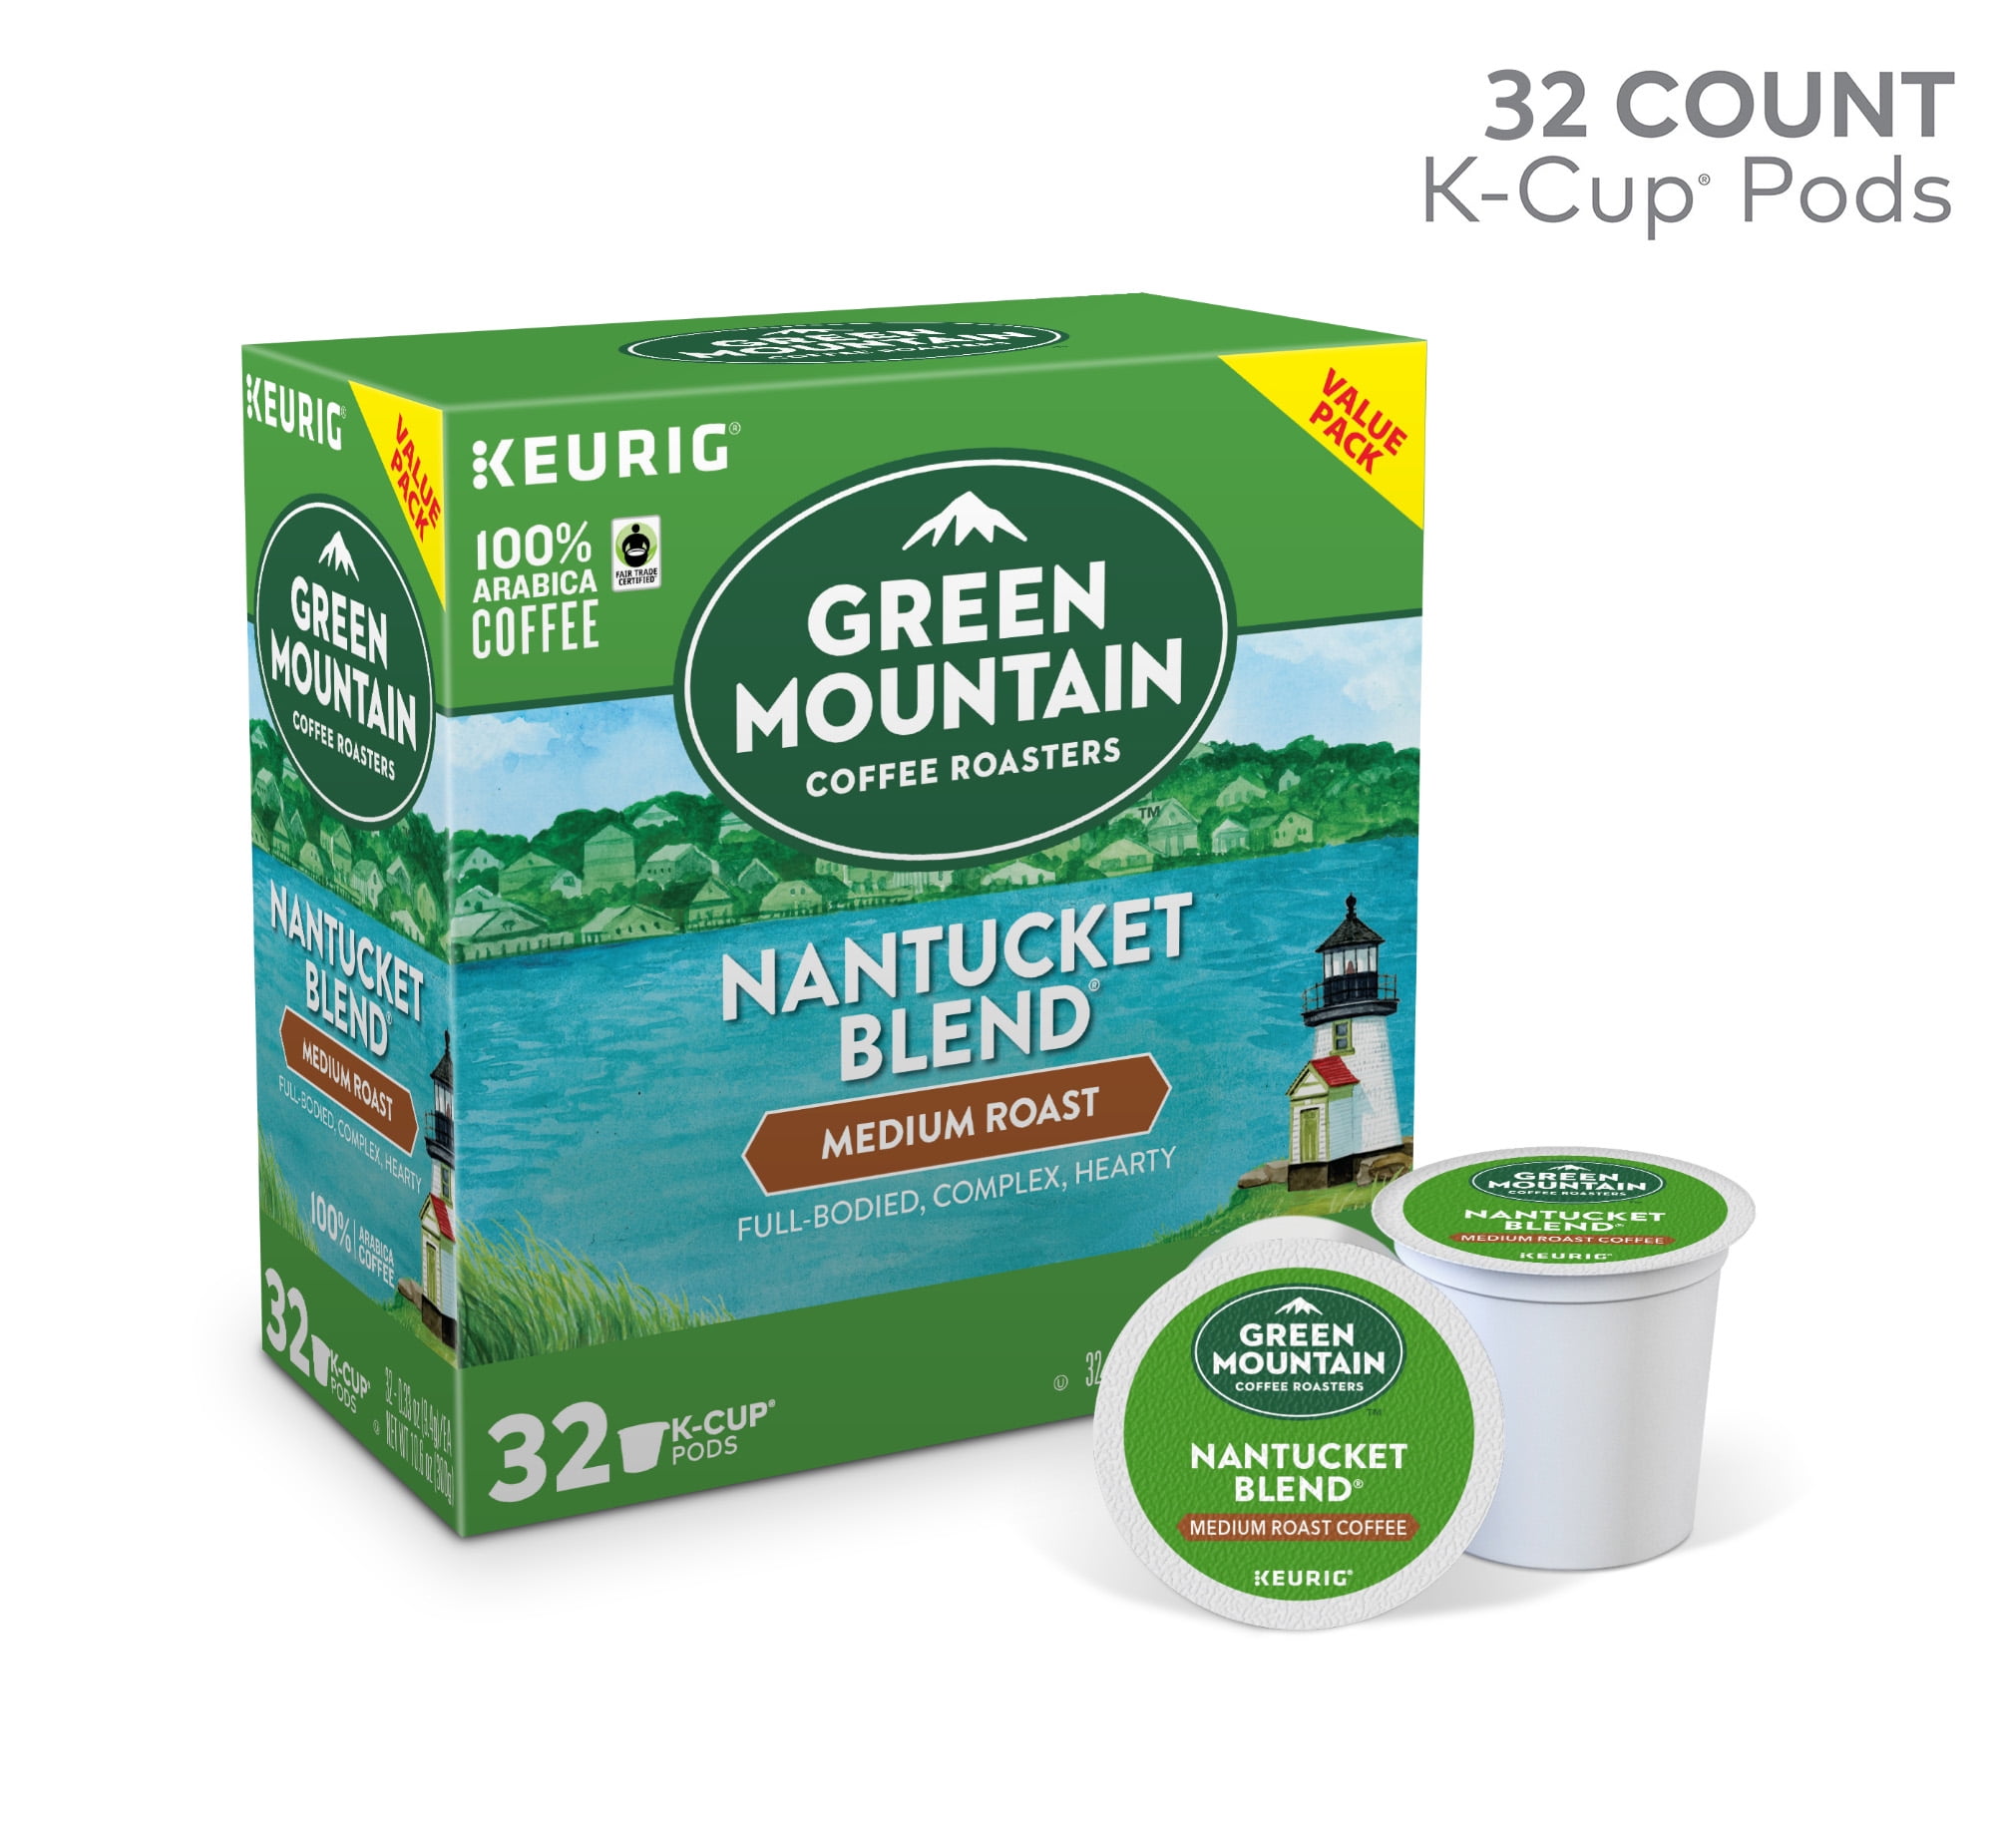 Green Mountain Coffee Nantucket Blend K-Cup Pods, Medium Roast, 32 Count  for Keurig Brewers